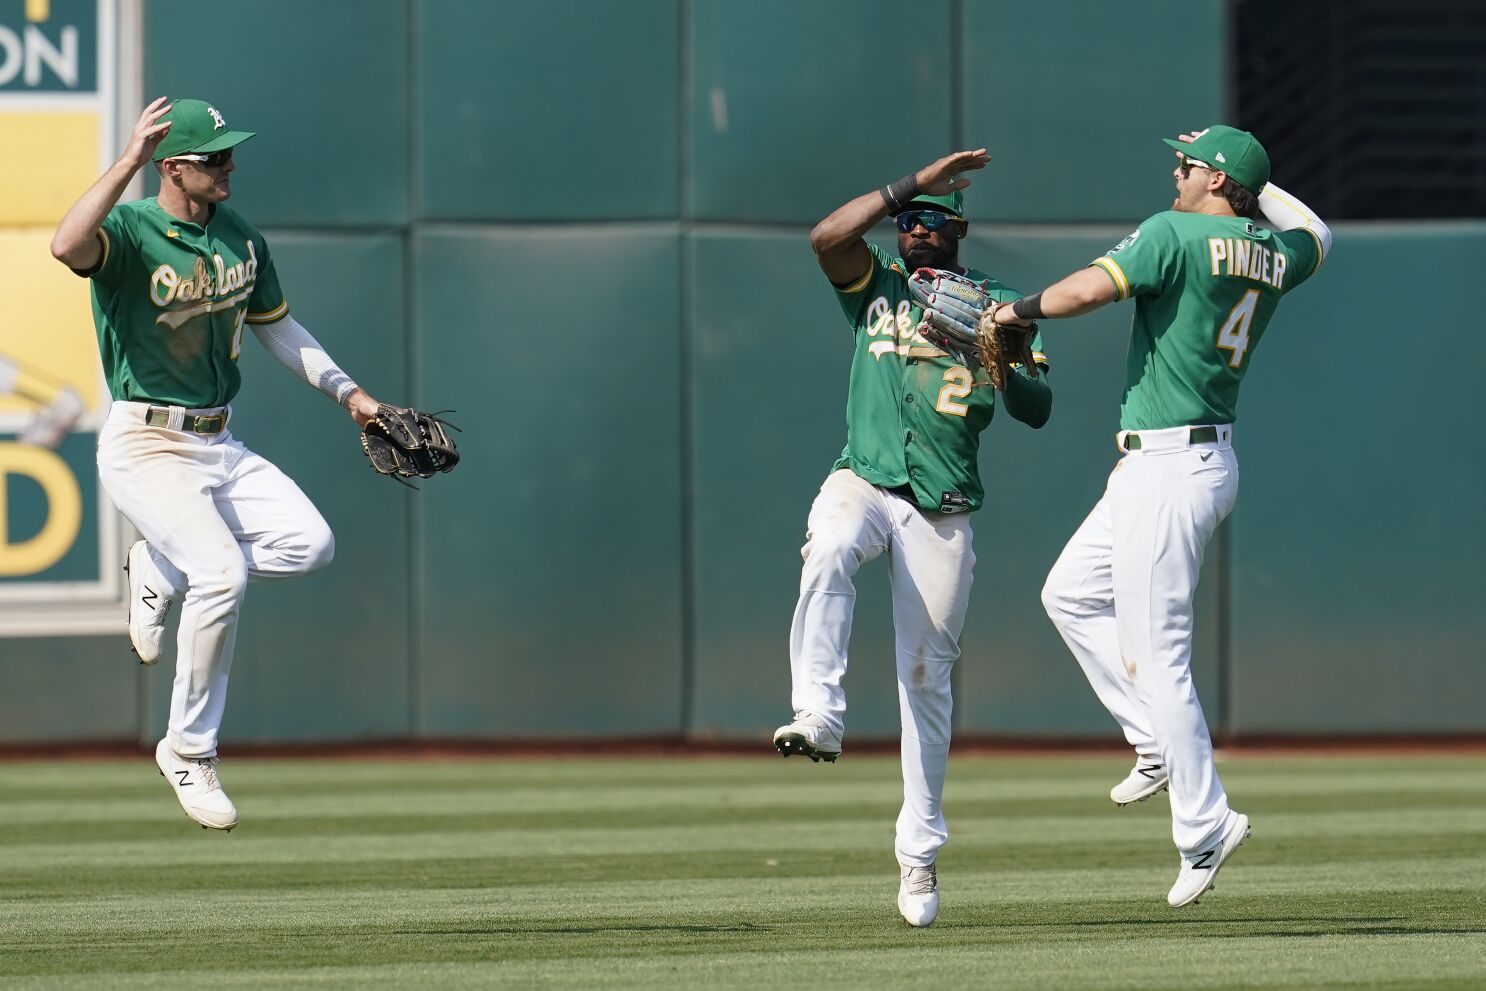 Rangers score go-ahead run on wild pitch to beat A's 3-2